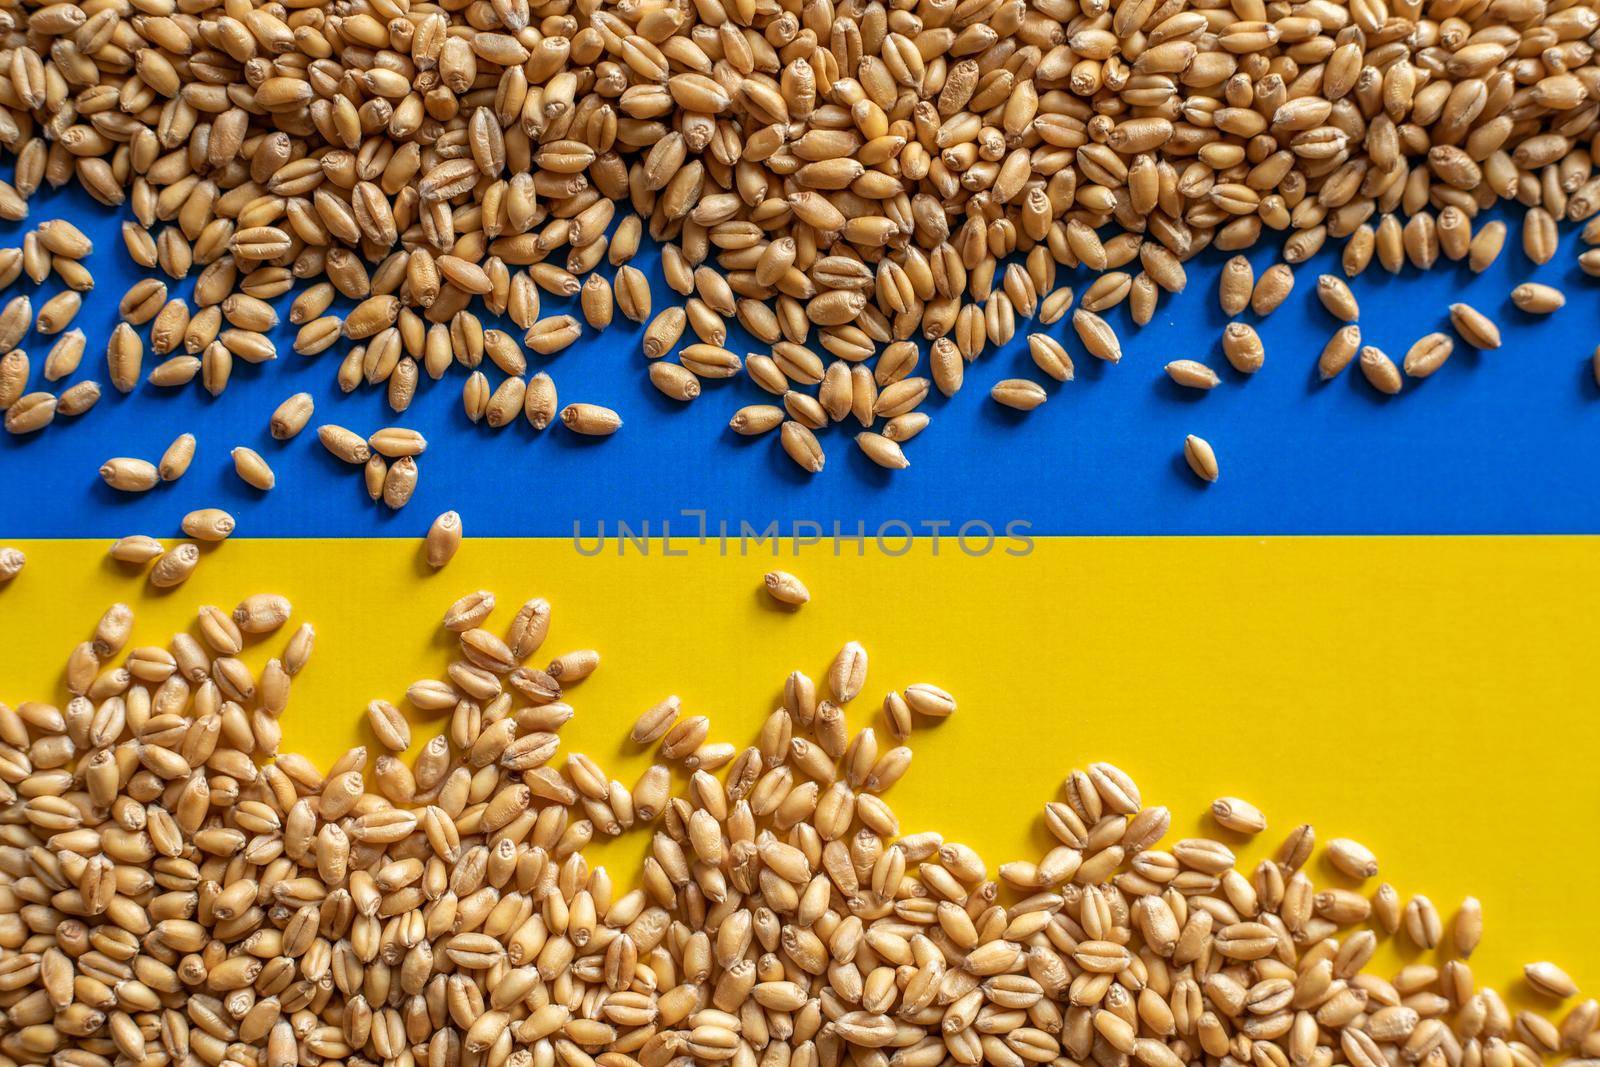 Wheat grain and Ukraine flag colors. Concept of grain floating problems by adamr